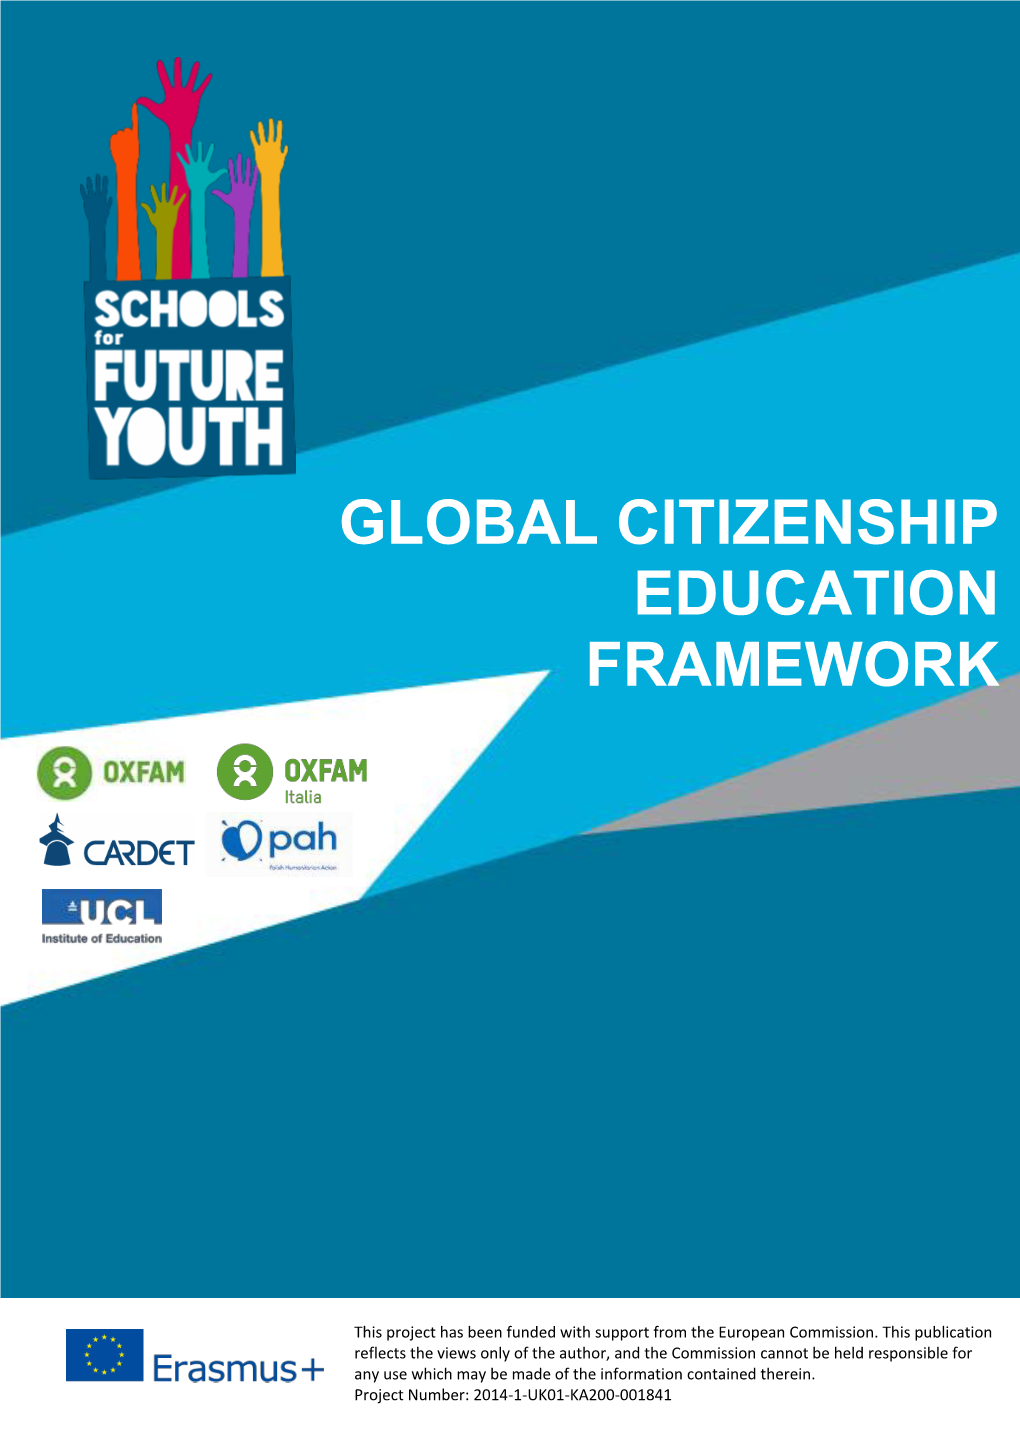 Global Citizenship Education Framework for Teachers, Trainers and Youth Leaders